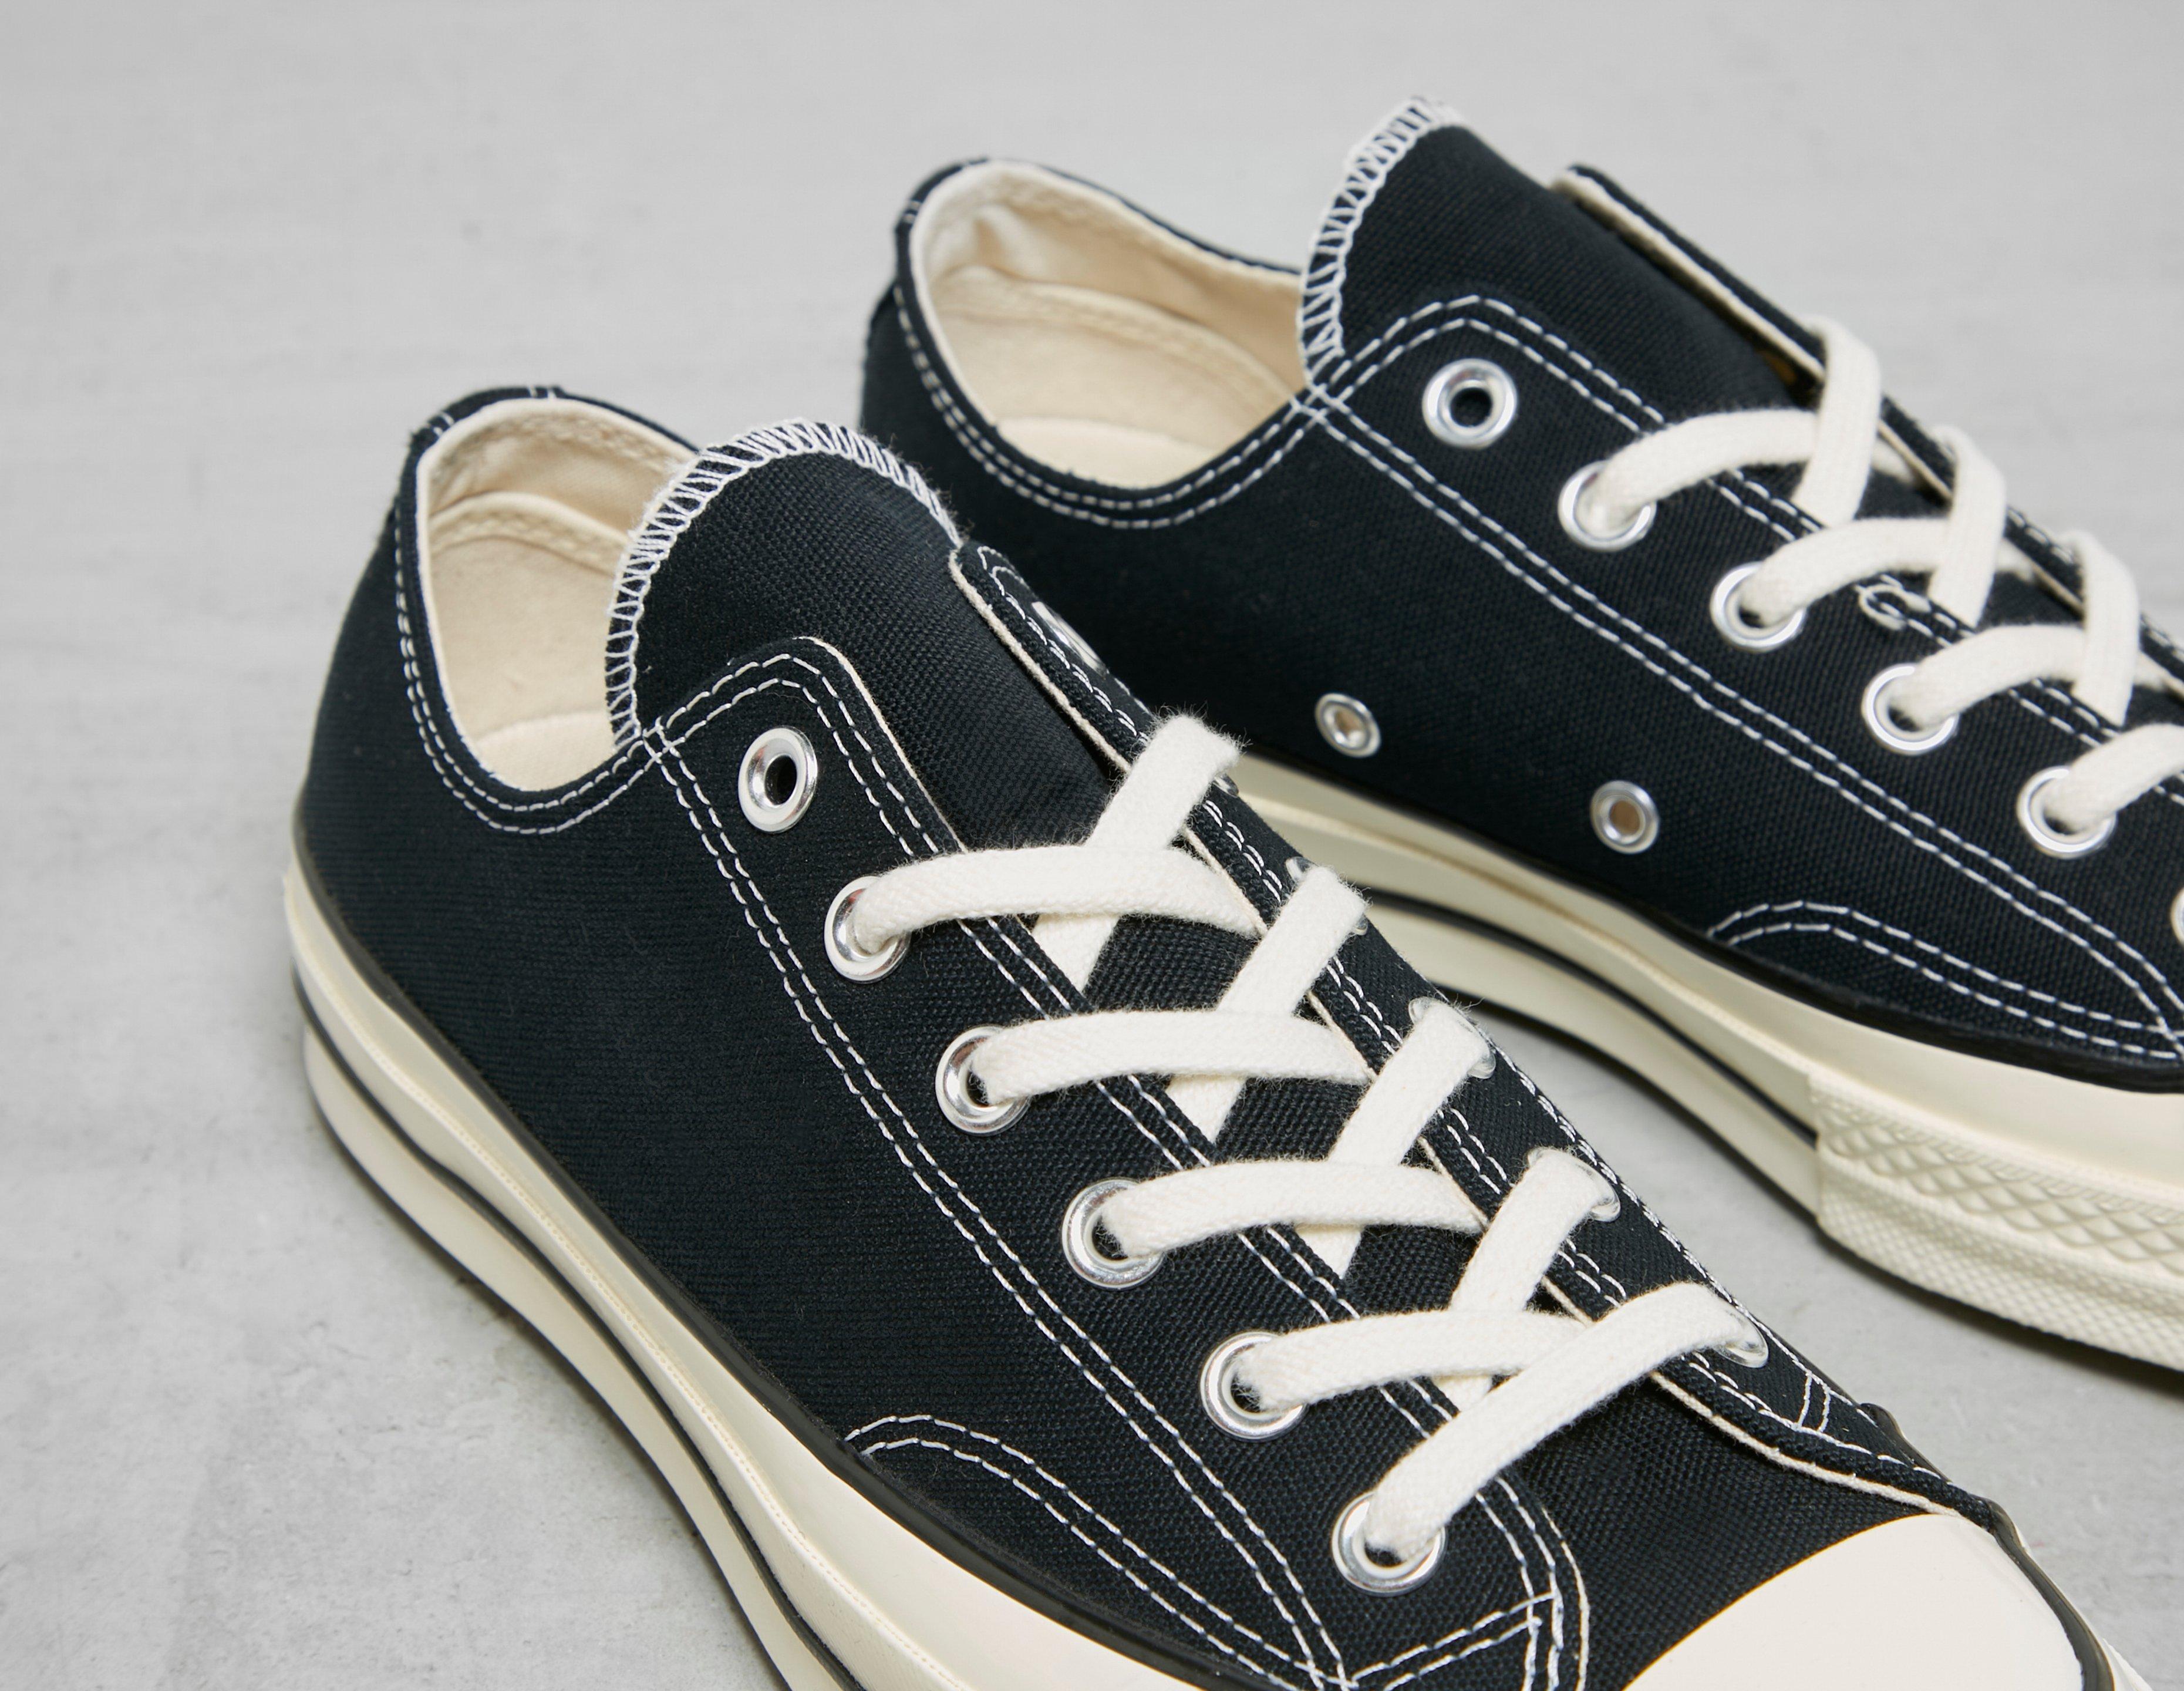 converse all star 70s low